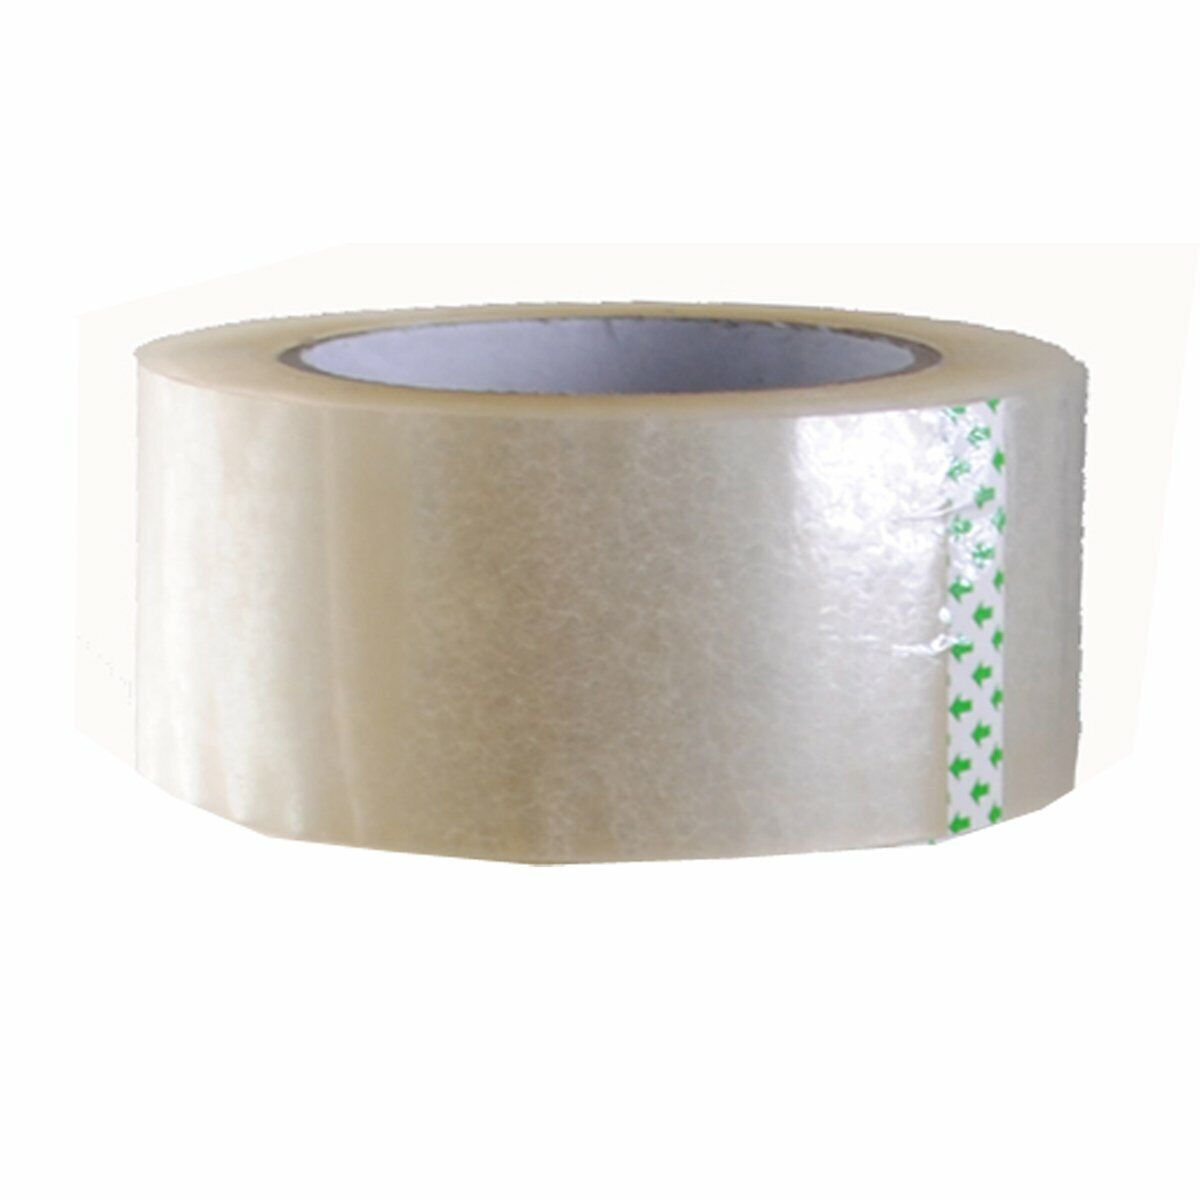 16 Rolls Clear Packing Tape 2.0 Mil Box Shipping Packaging Tape